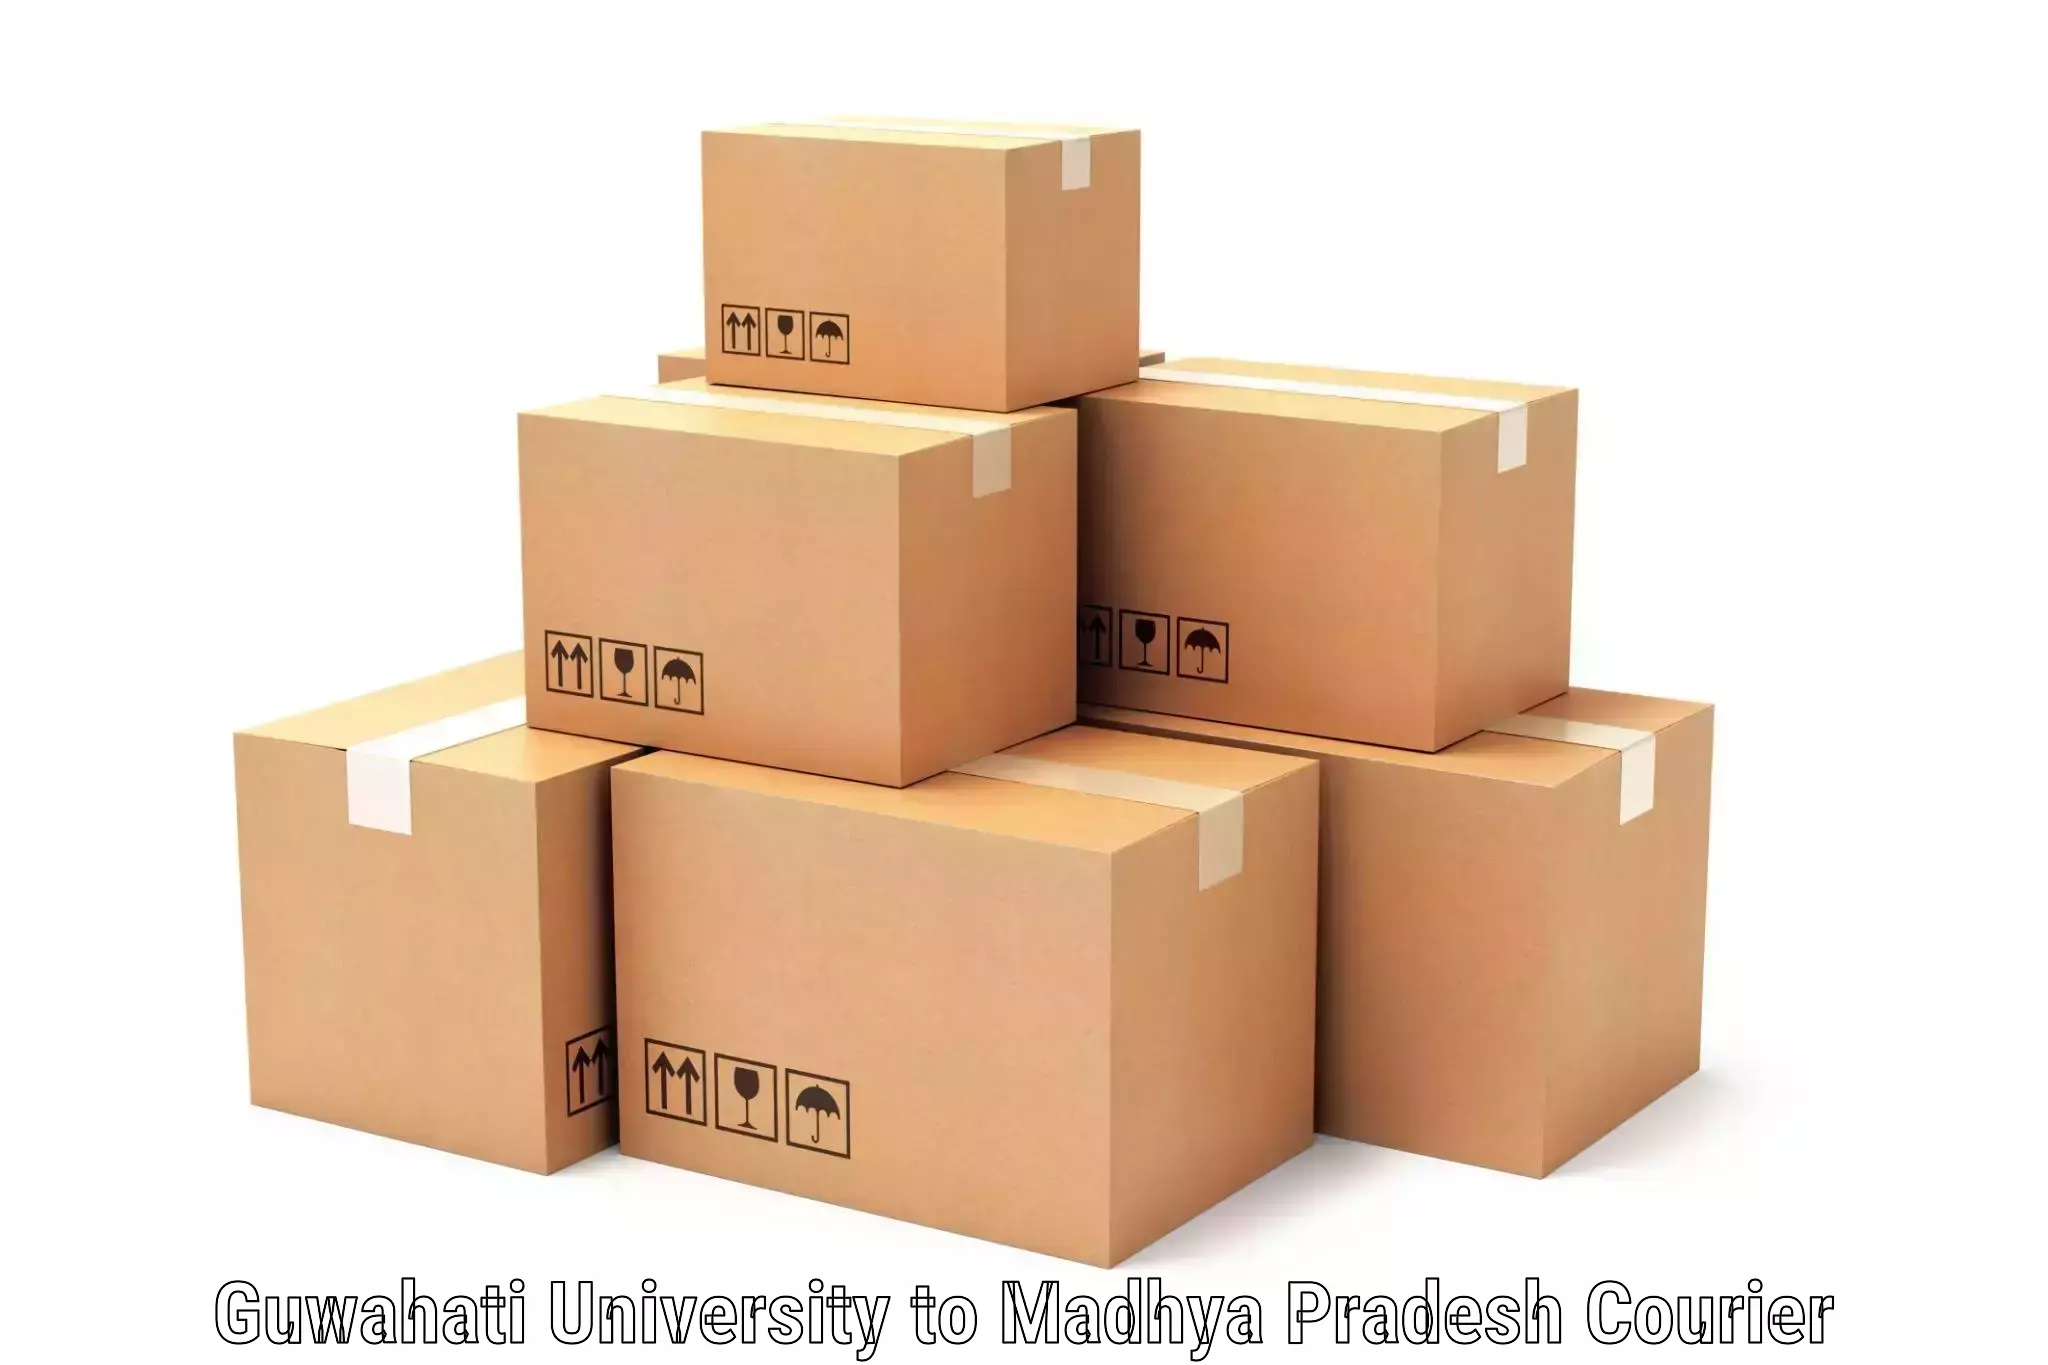 Personal parcel delivery Guwahati University to Dindori